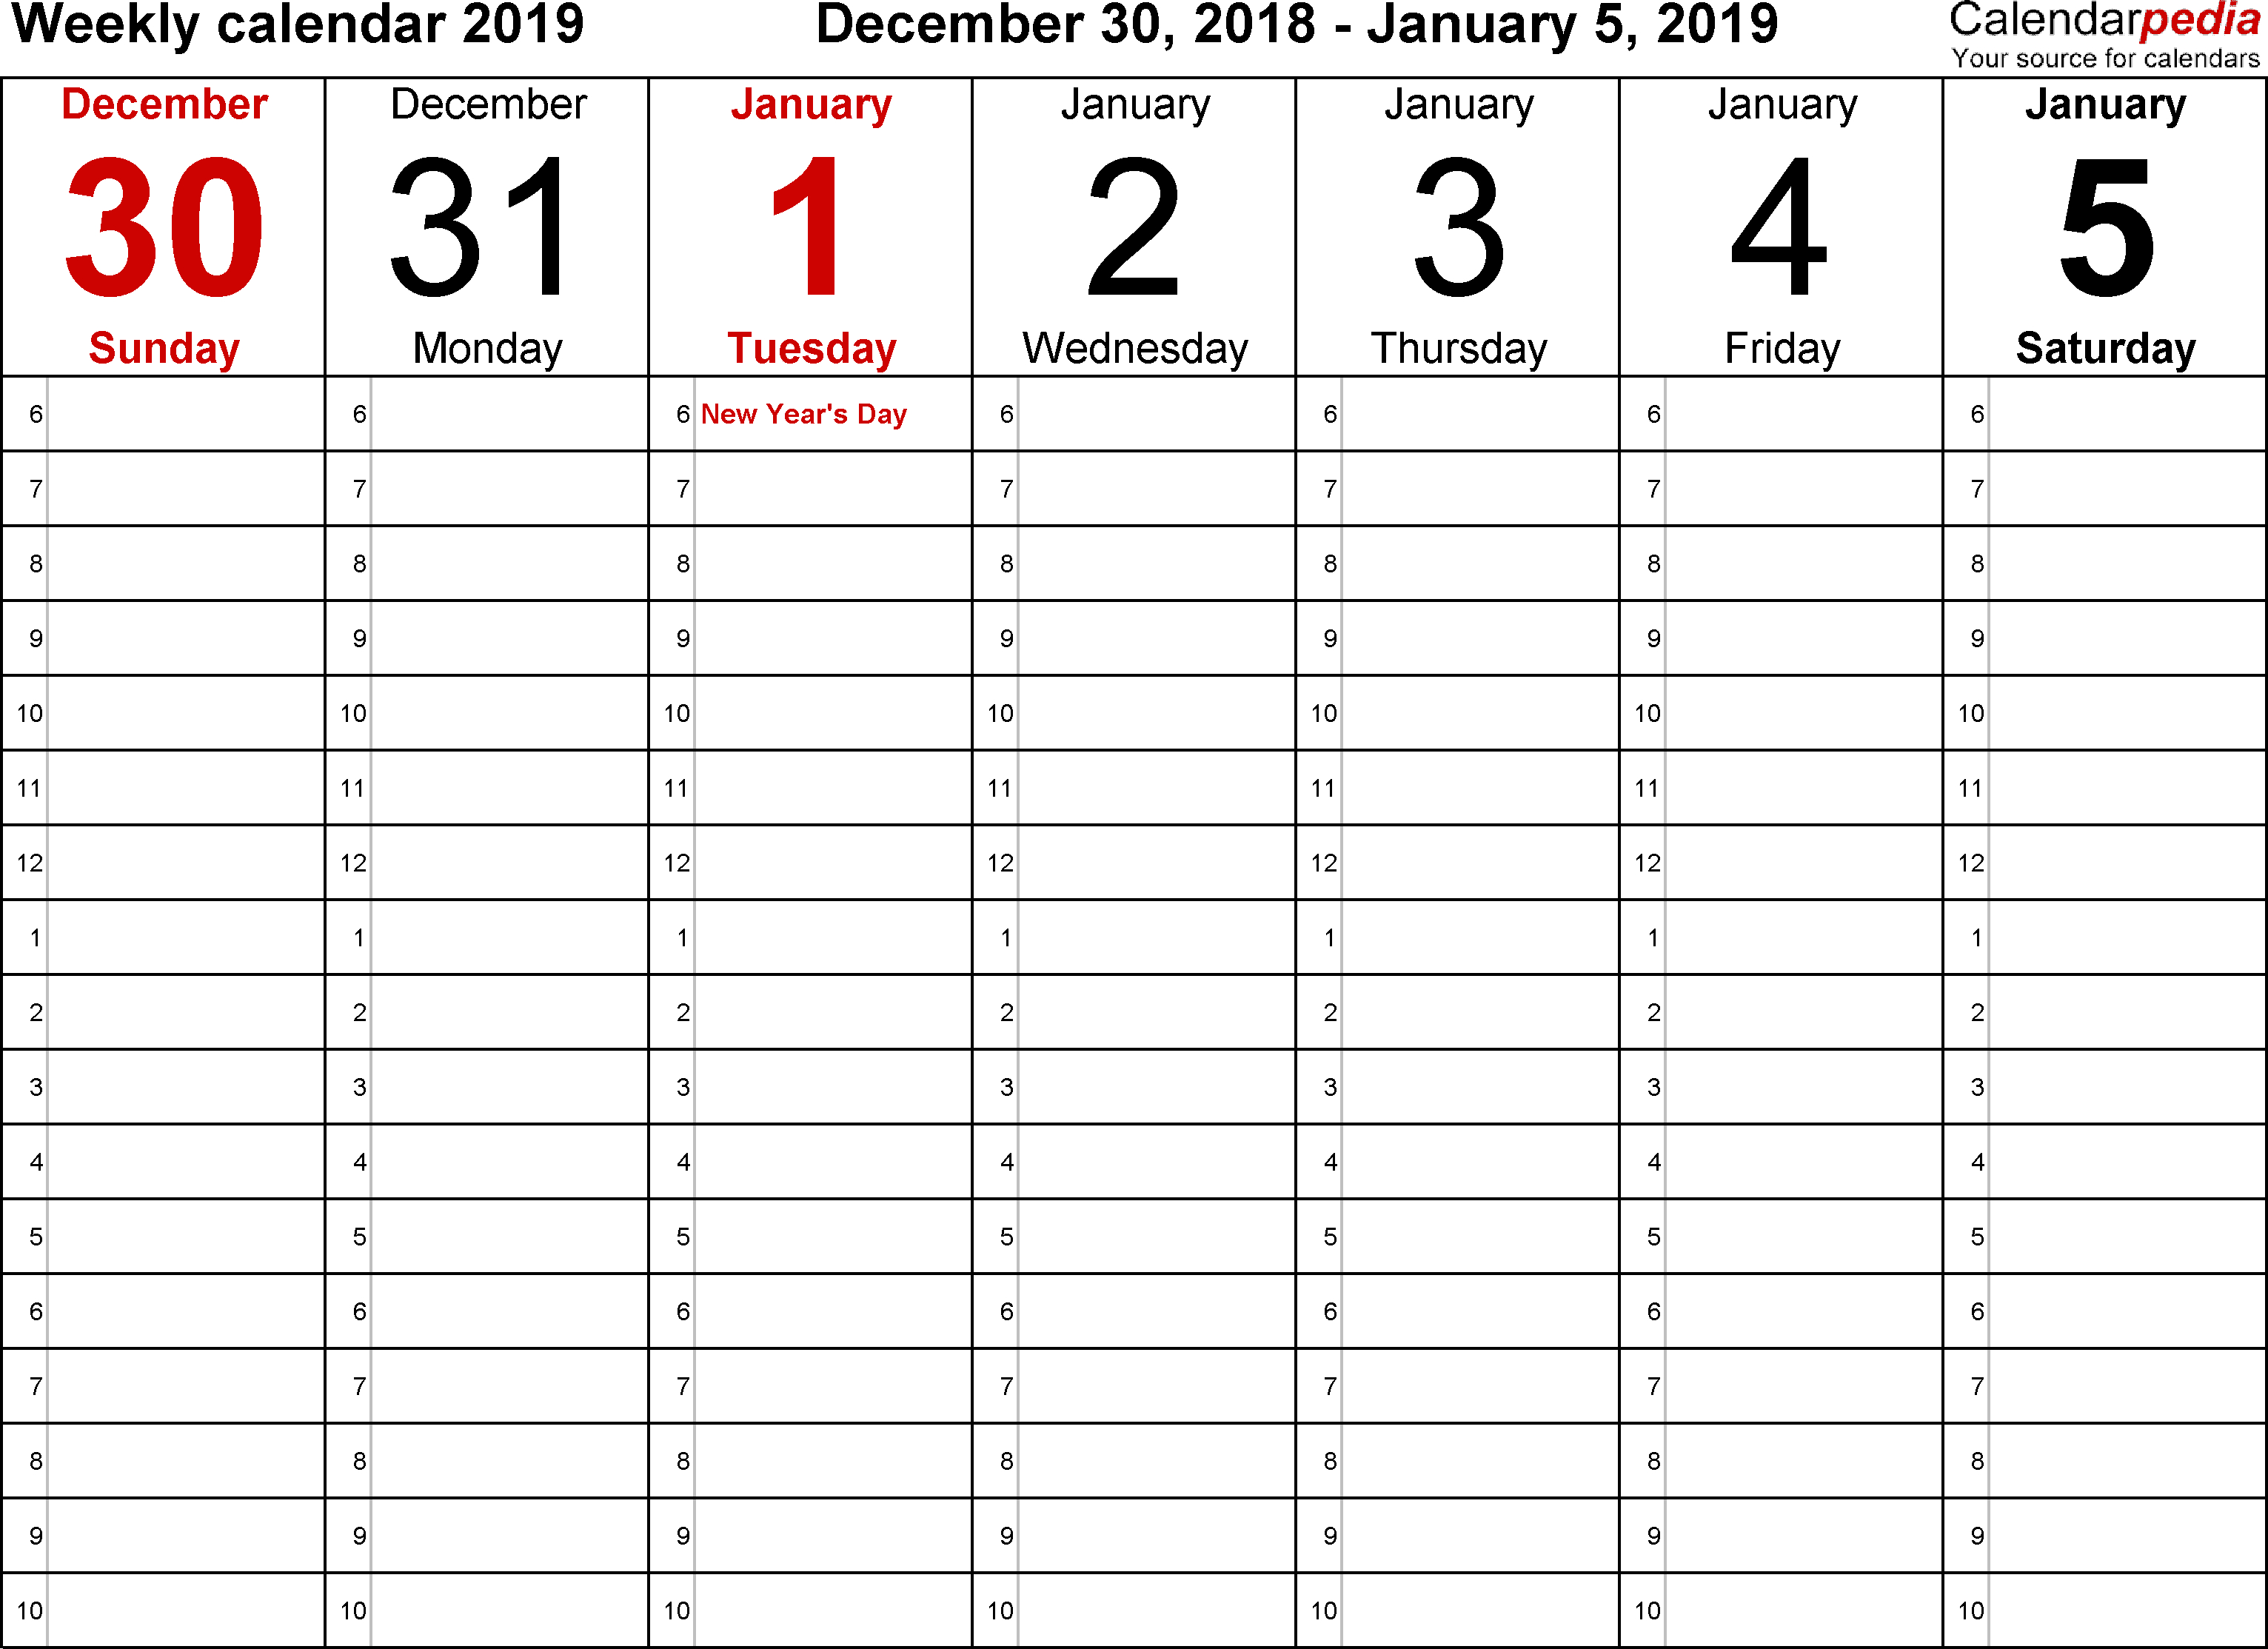 Weekly Calendar 2019 For Word - 12 Free Printable Templates - Time Management Forms Free Printable